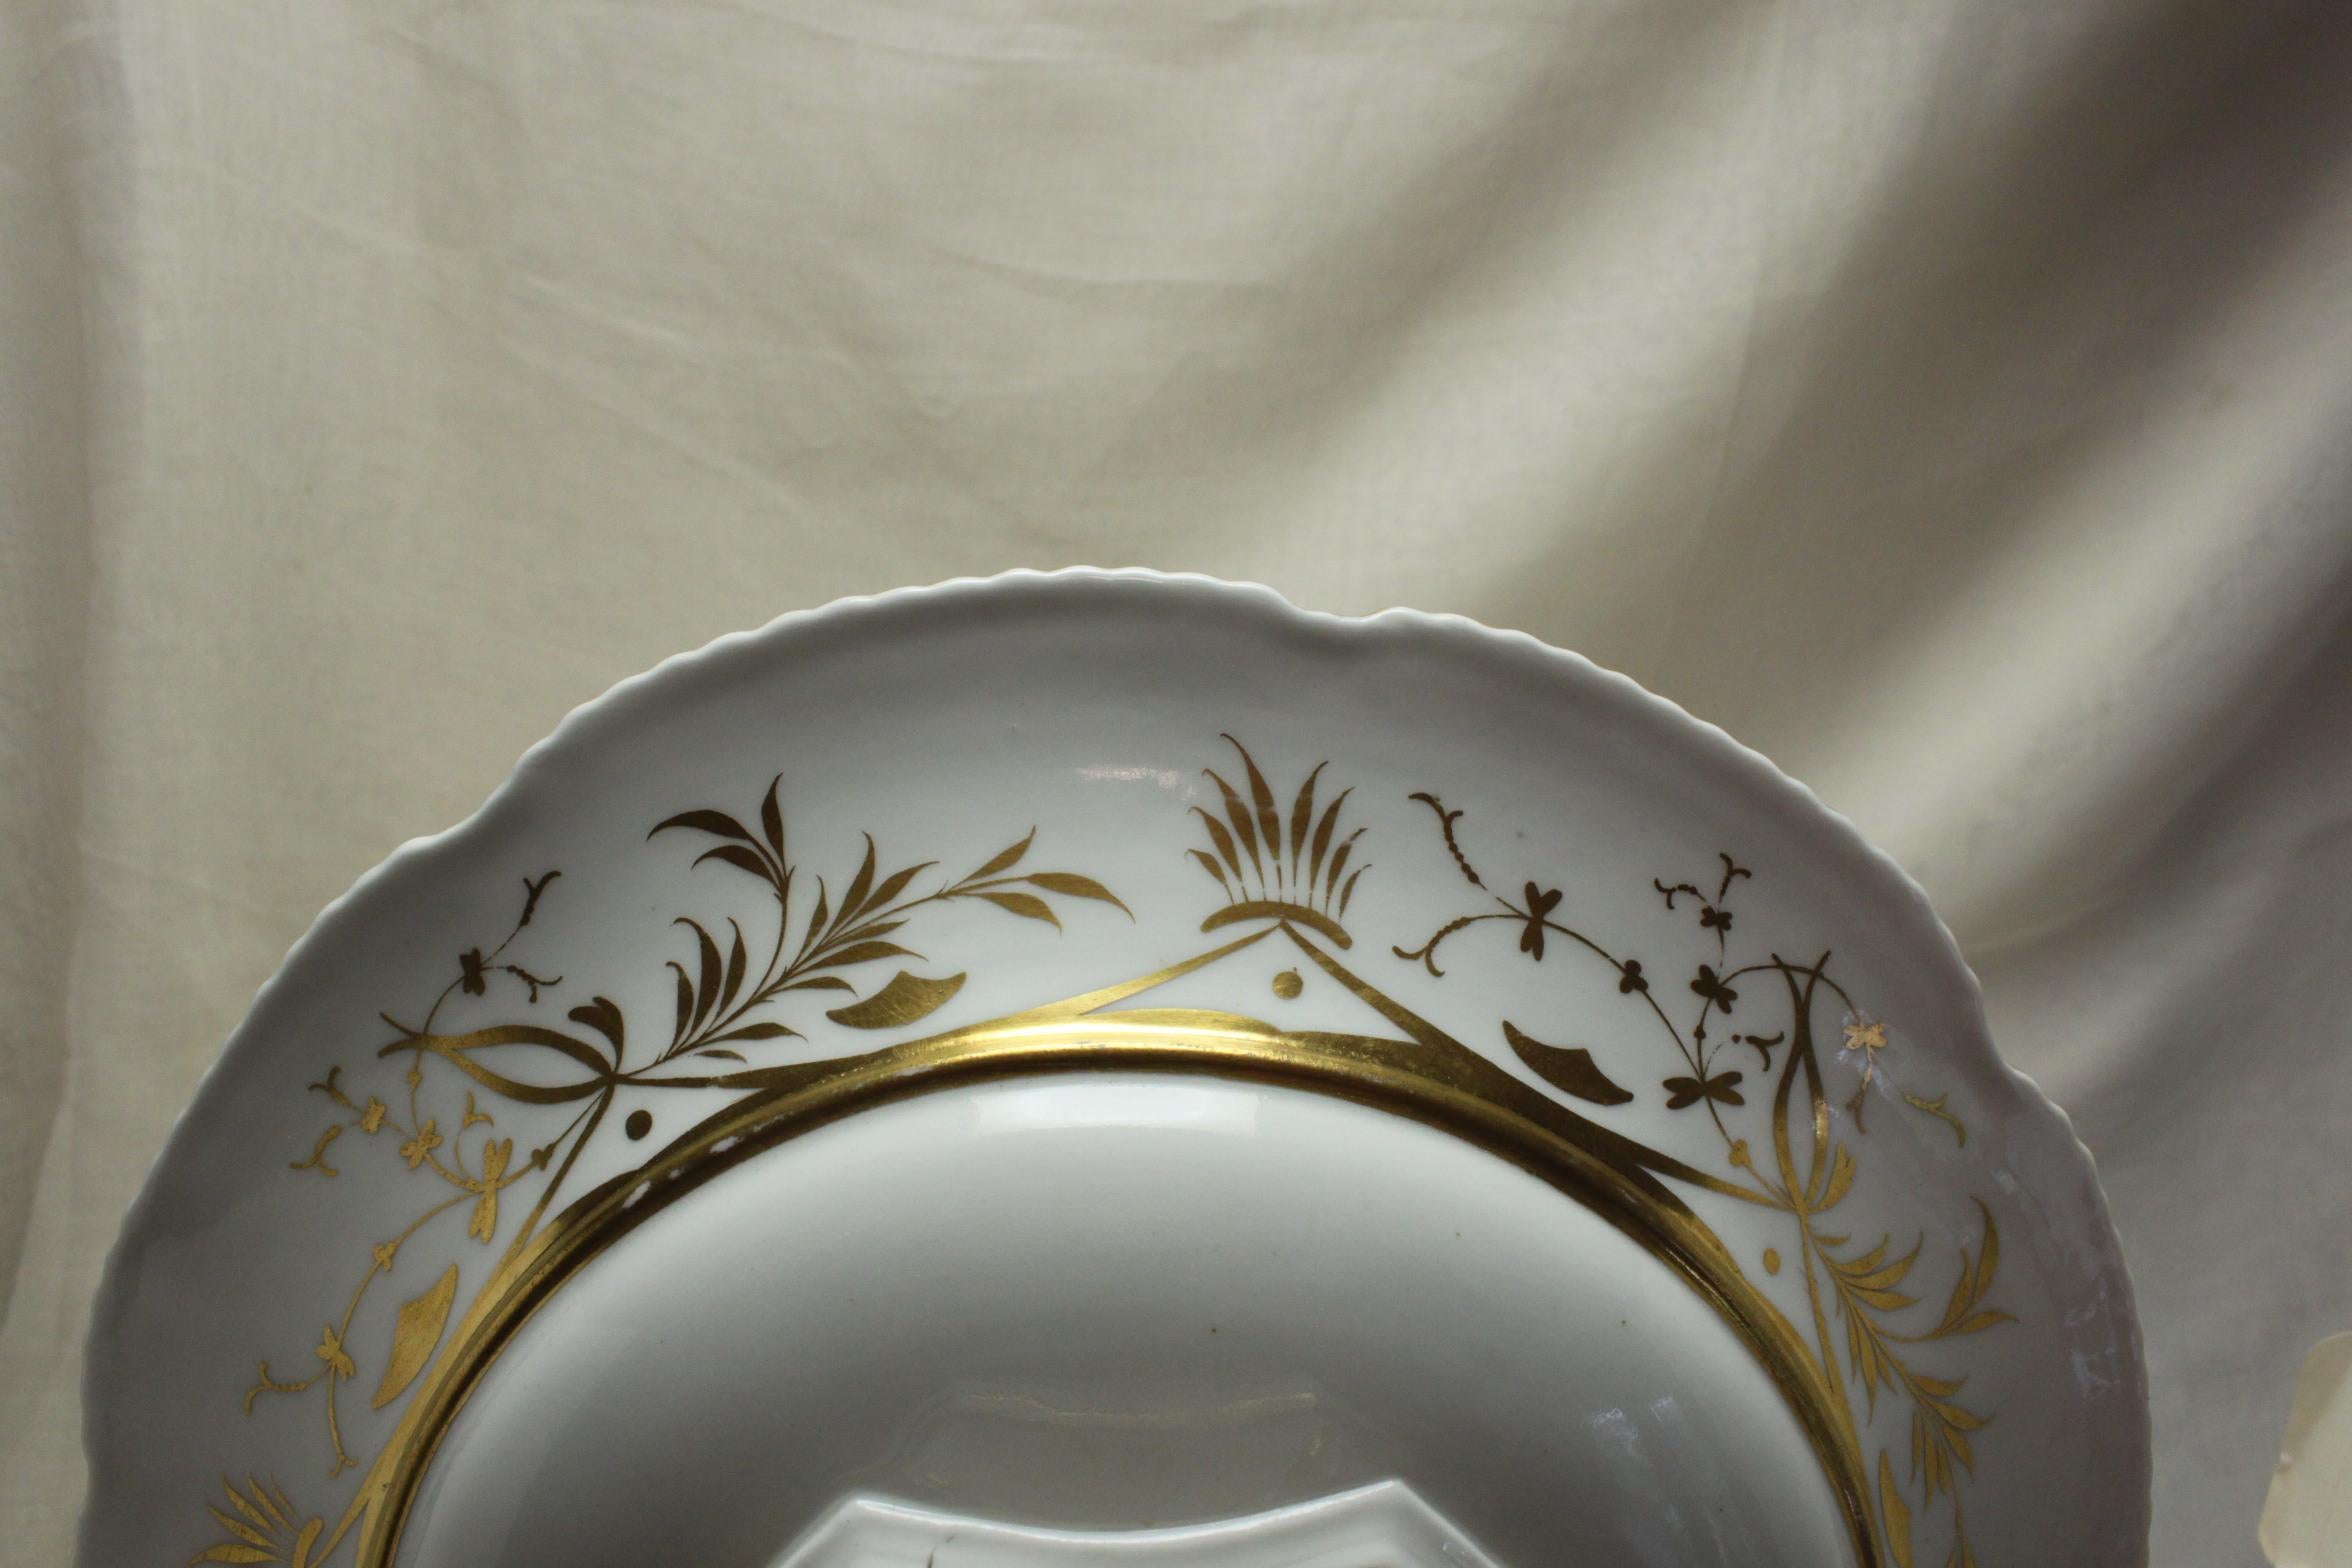 Early 19th Century Chamberlain Worcester Porcelain Comport Decorated with Fancy Birds